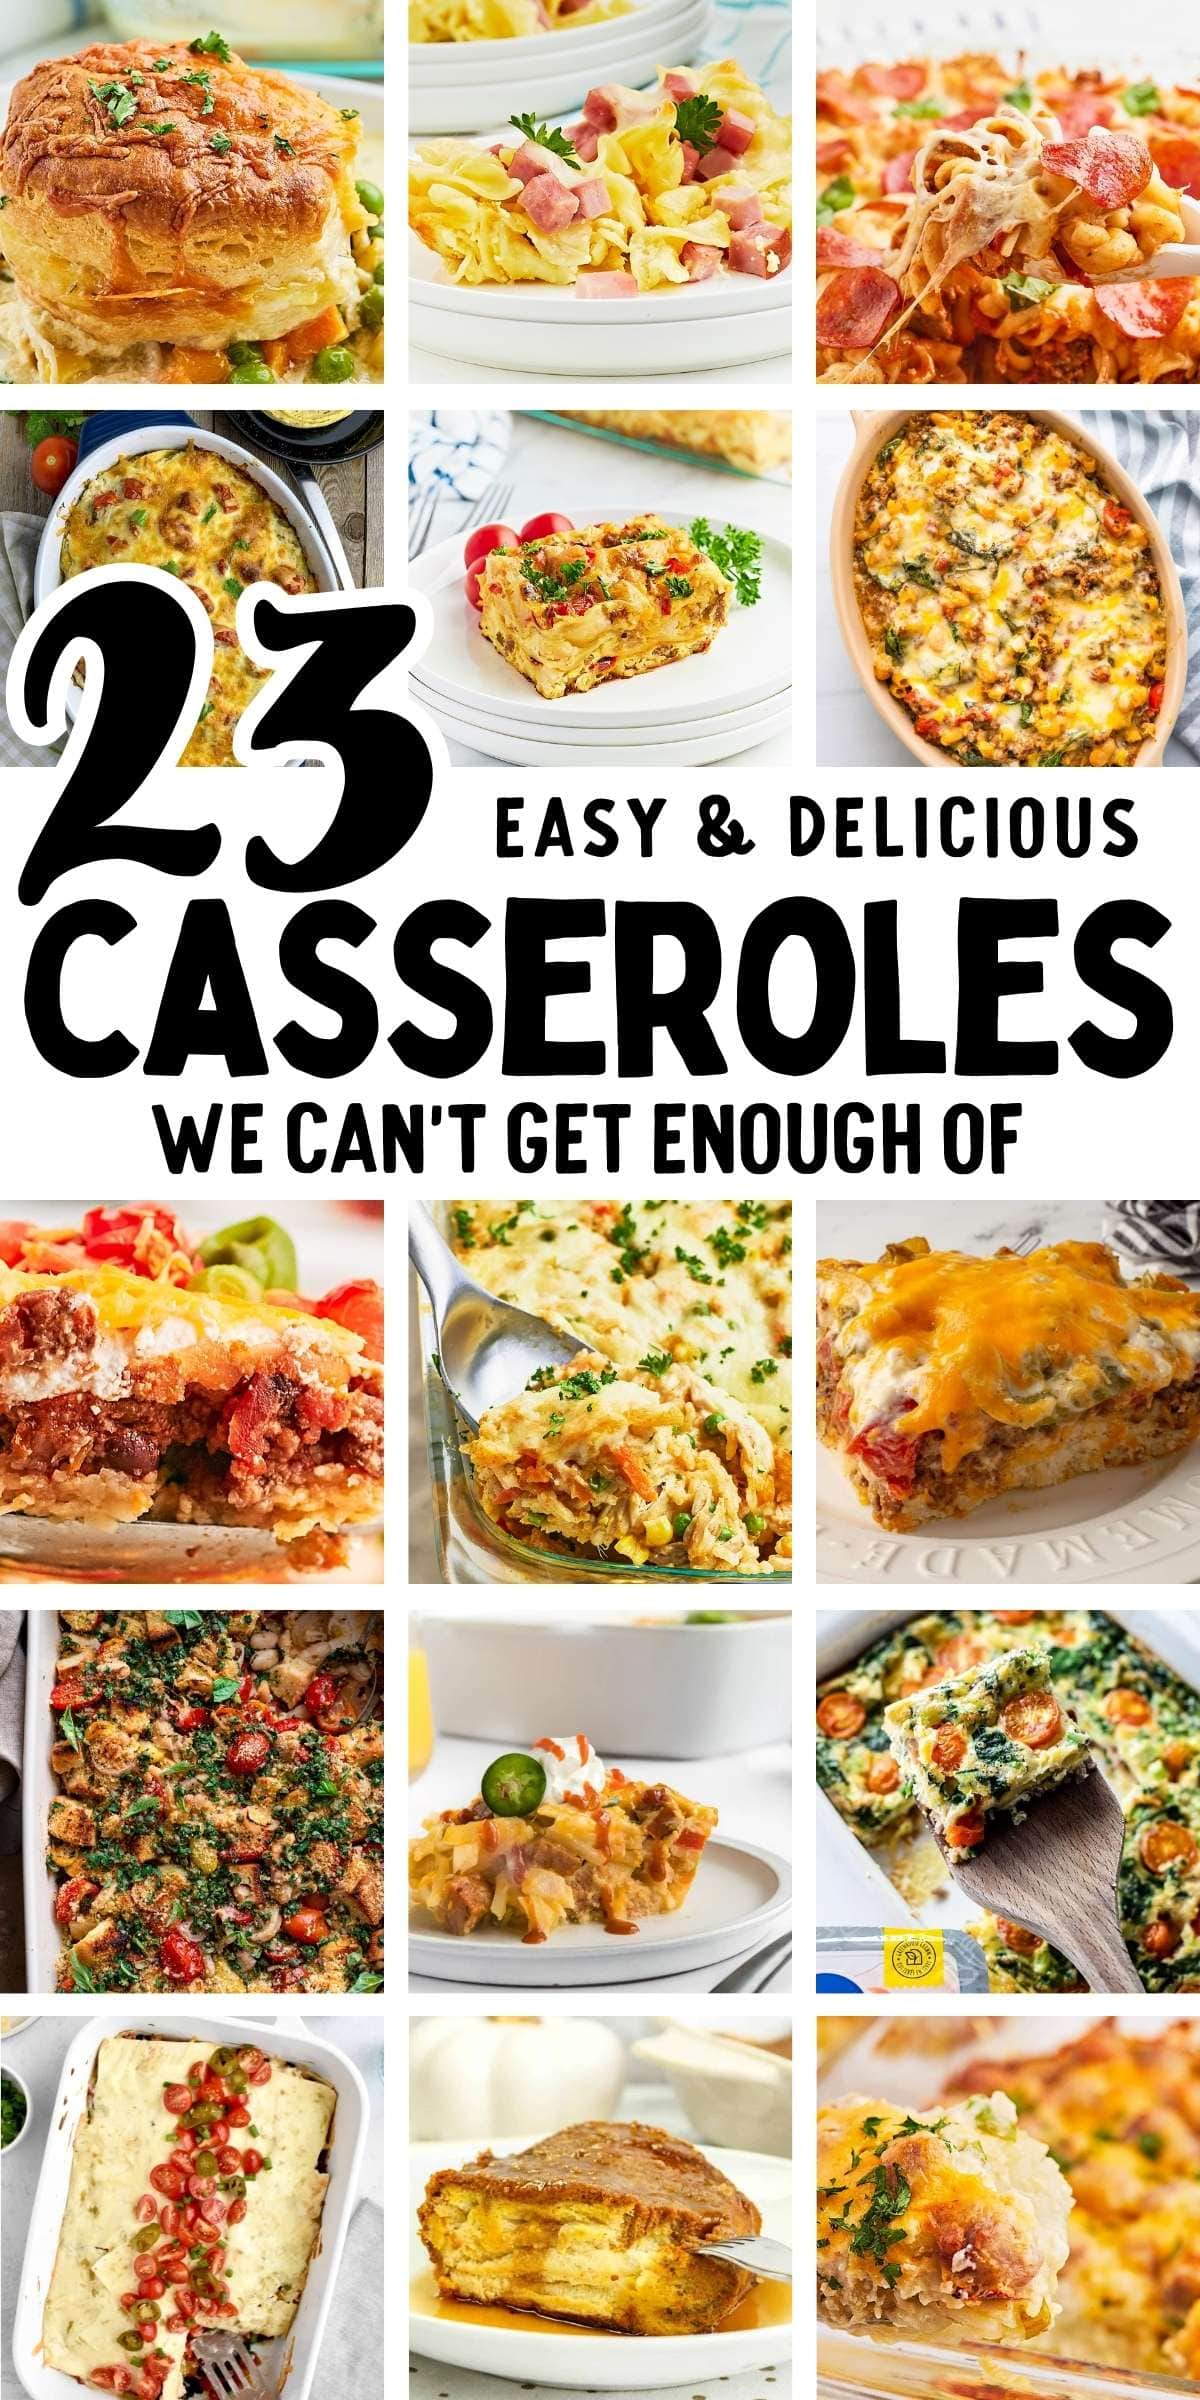 Craving the ultimate comfort food that's as easy as it is delicious? 🍲 Discover 23 top-ranked casseroles that will make you the hero of family dinners and potlucks! From classics like Chicken and Rice to seasonal gems like Pumpkin French Toast, this list is your go-to guide. #cheerfulcook #casserole #casserolerecipes #easyrecipes #comfortfood #homecooking ♡ cheerfulcook.com via @cheerfulcook